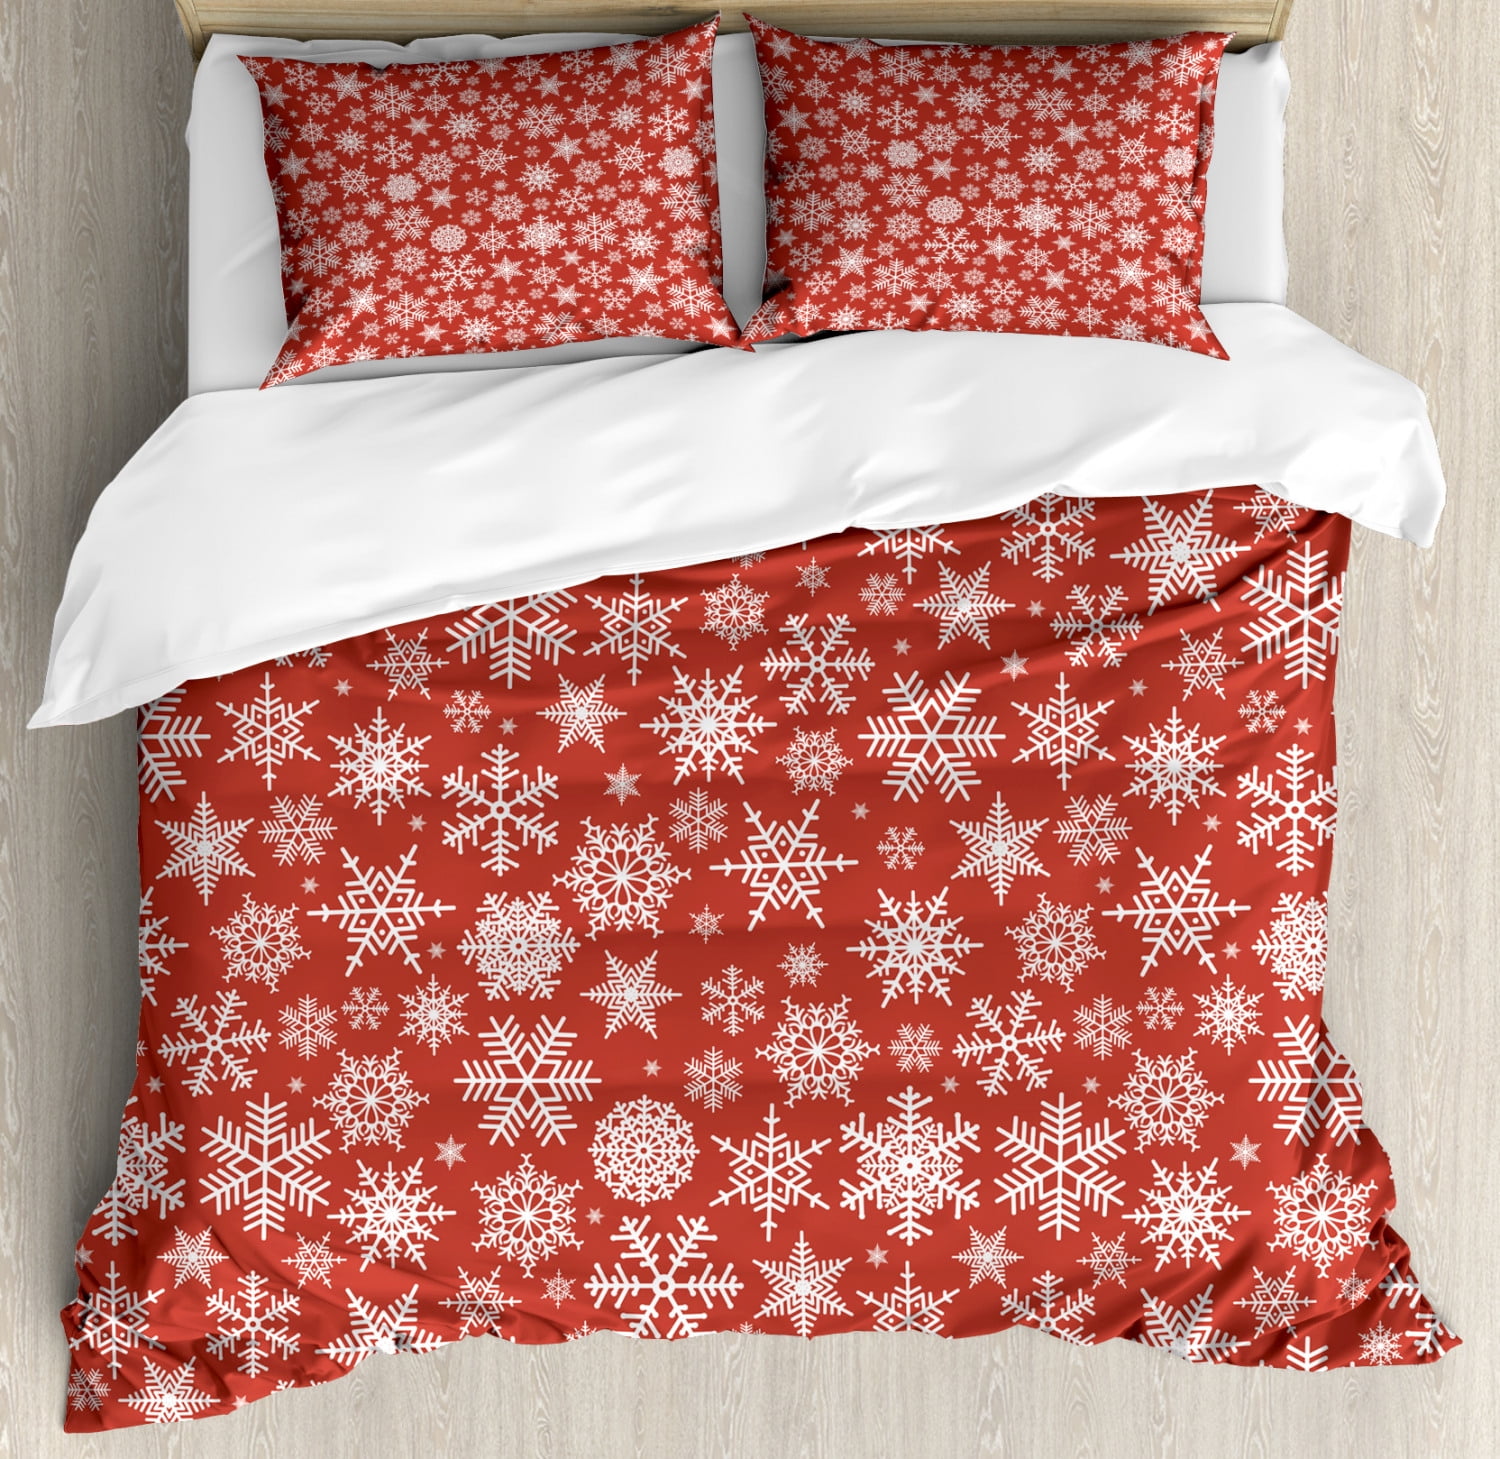 Red Duvet Cover Snowflakes Christmas Decor Queen Duvet Cover Twin Duvet Cover King Duvet Cover